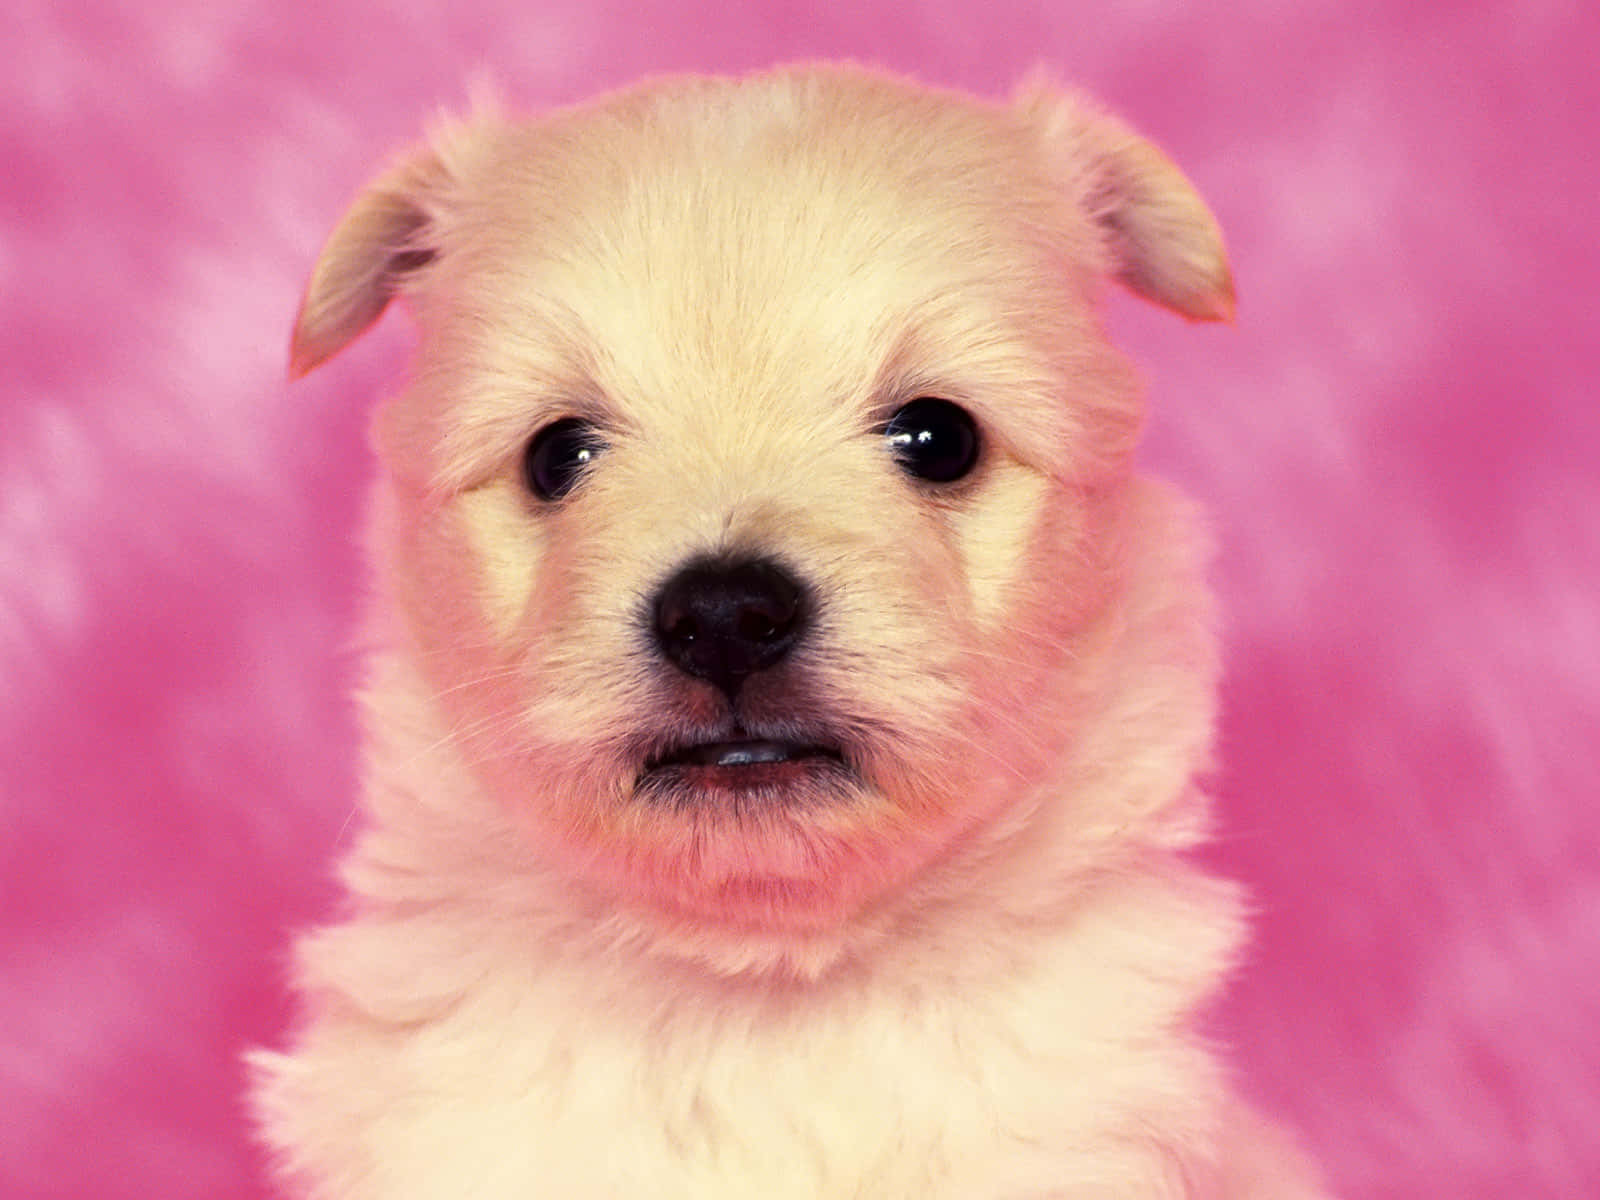 A White Puppy Is Sitting On A Pink Background Wallpaper